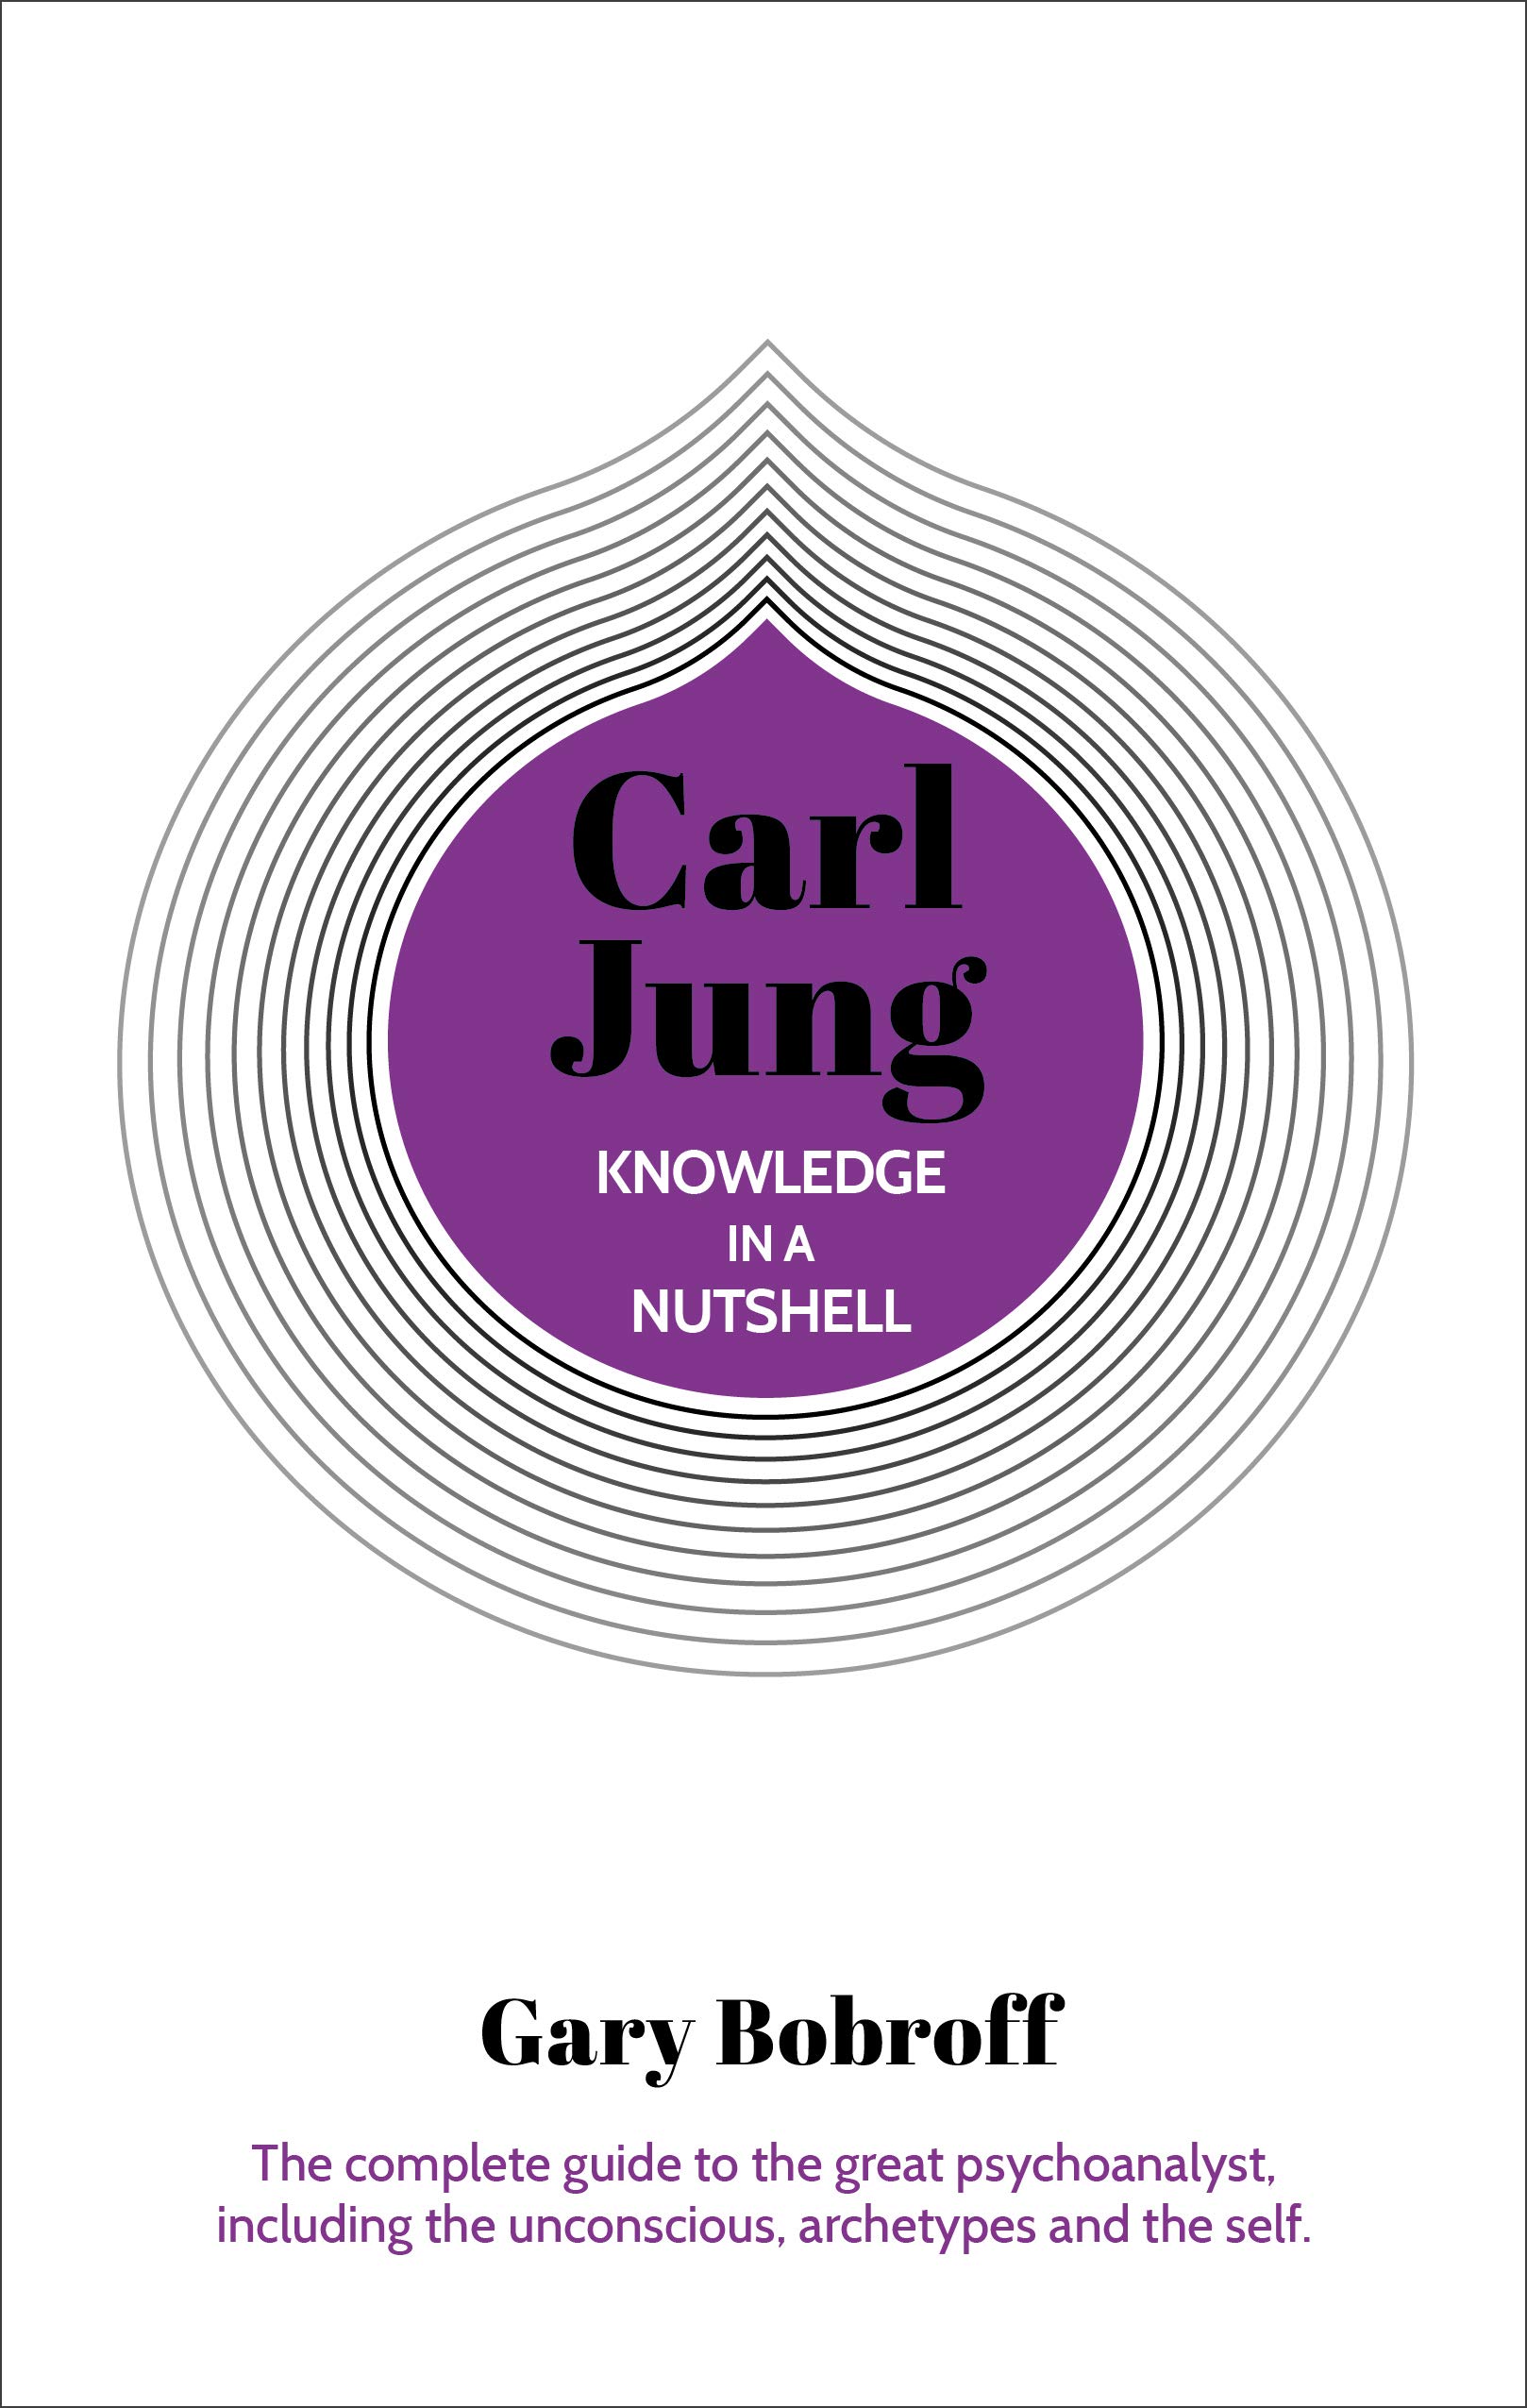 Knowledge in a Nutshell - Carl Jung